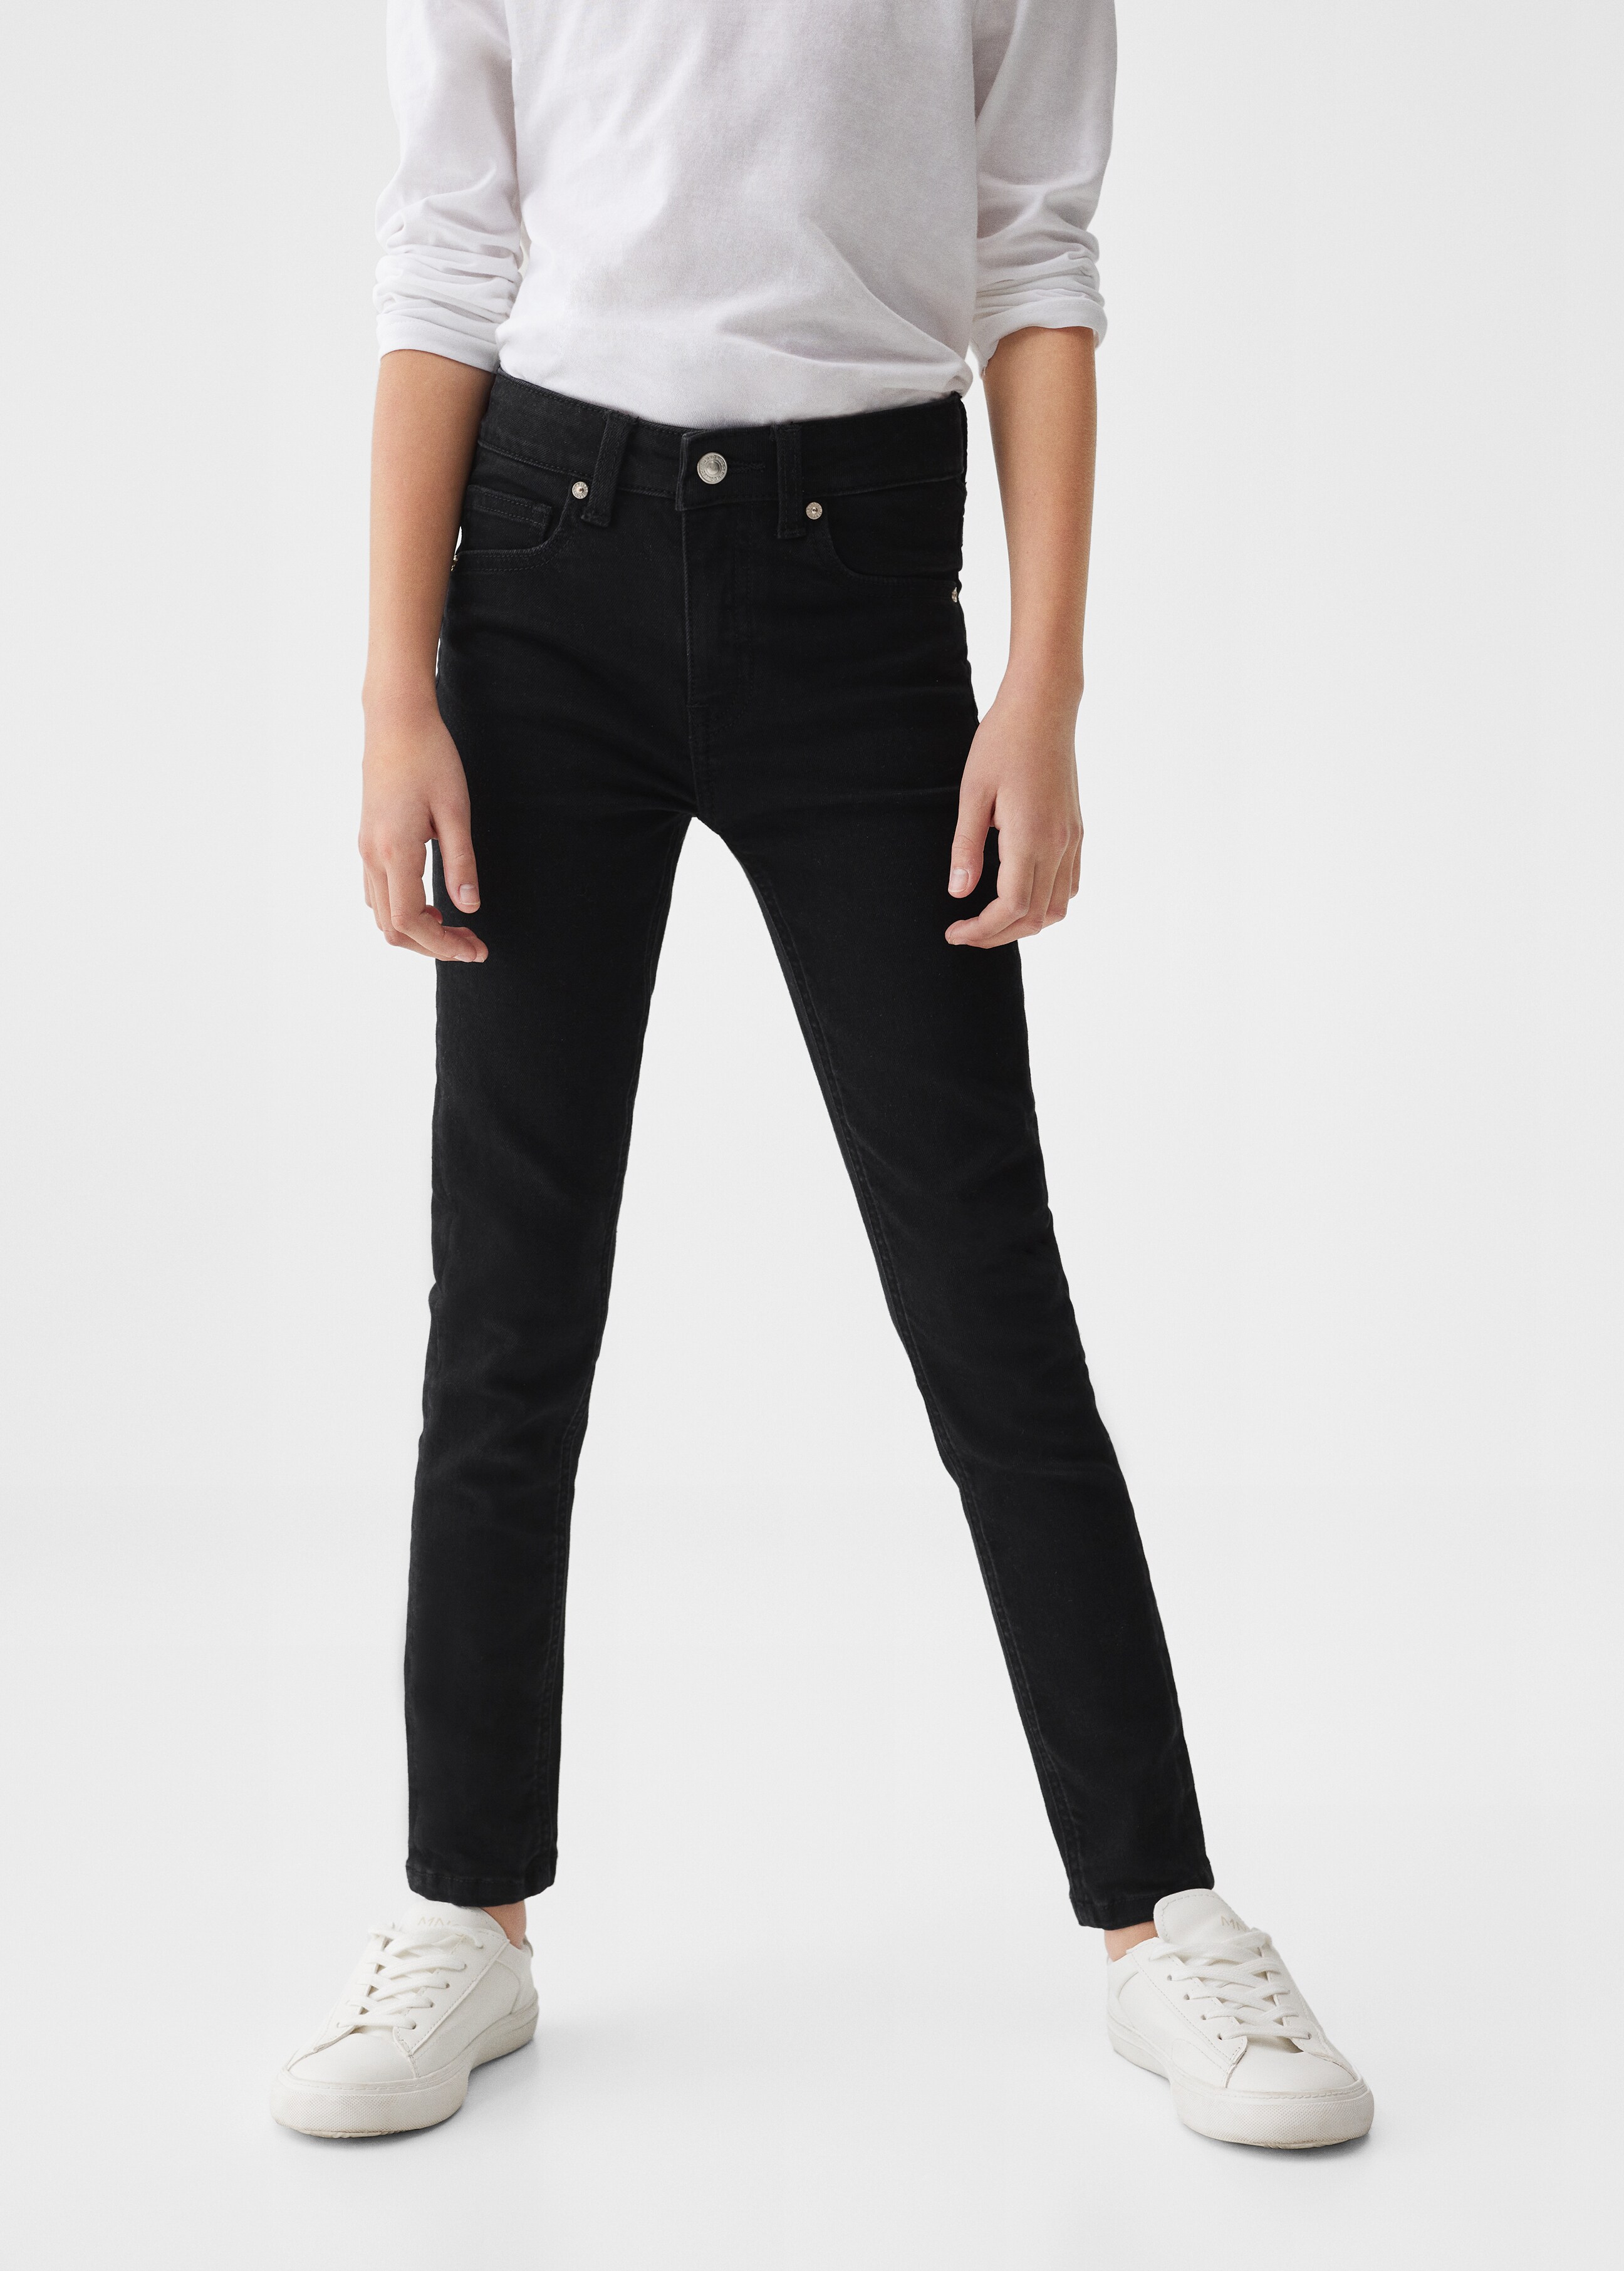 Skinny jeans - Details of the article 6